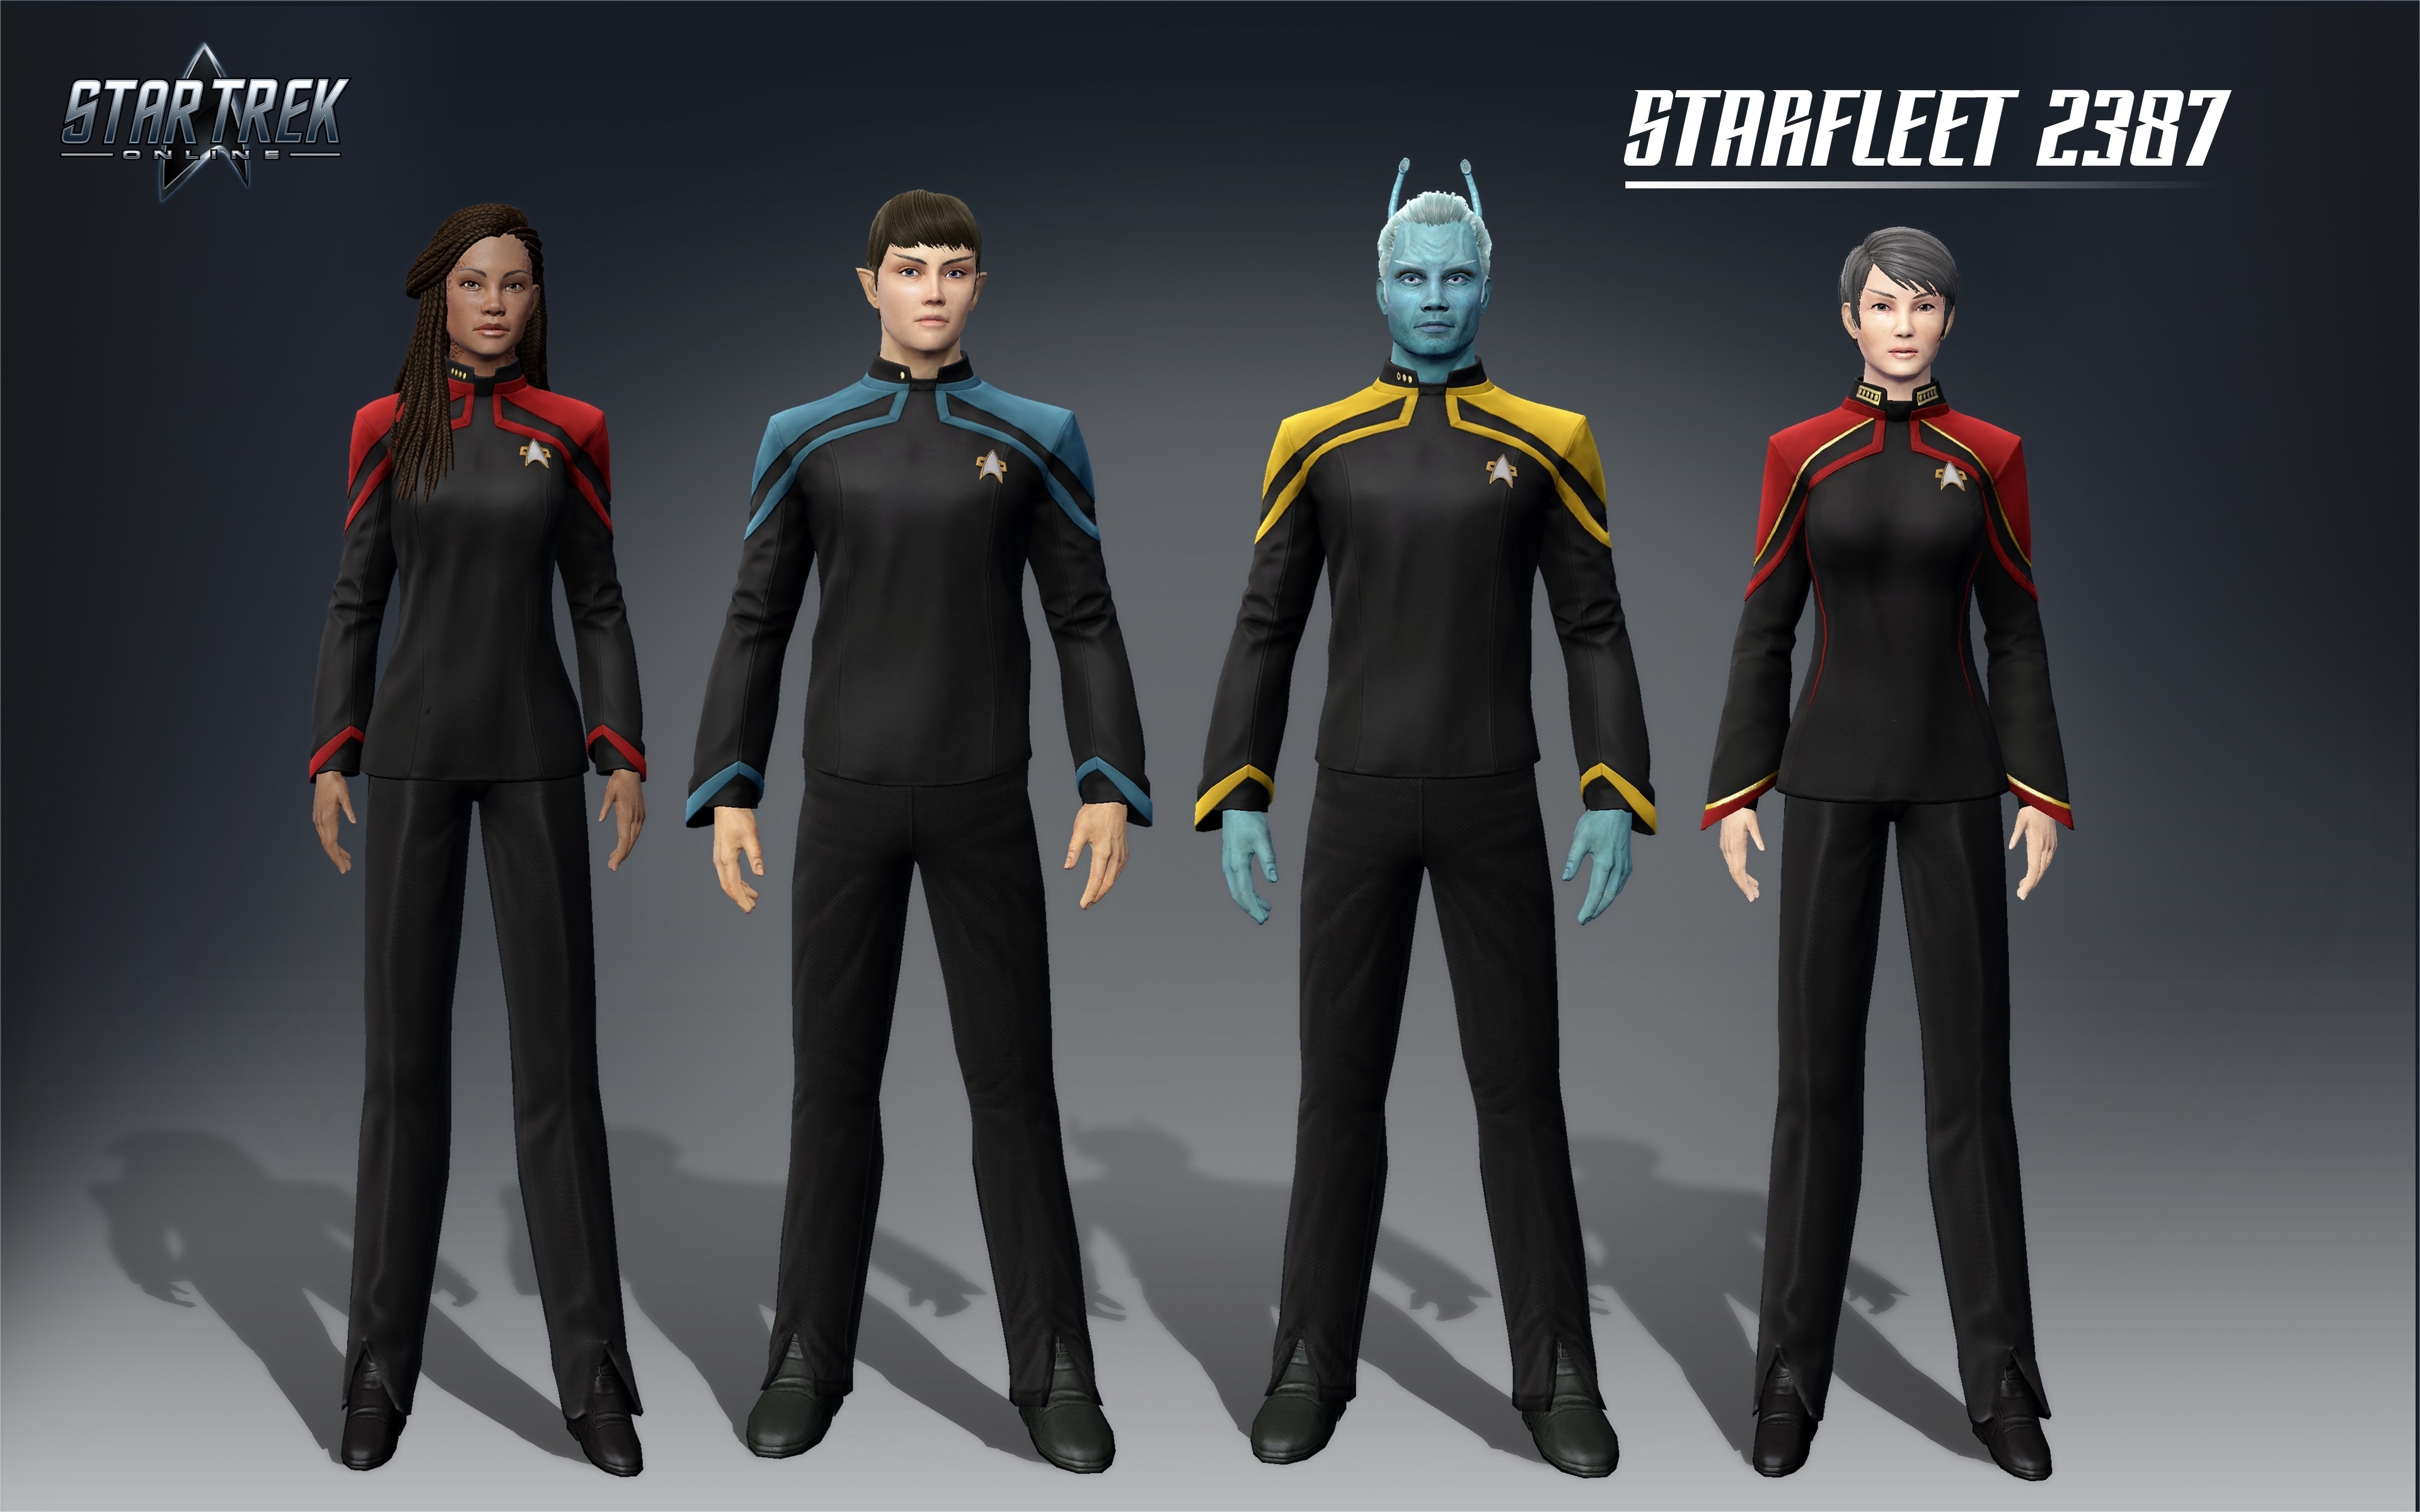 pack - [ONE-PS4] Le pack Starfleet Flashback ! Cc0326a019afd274c1e815a000f7c5ae1690305968